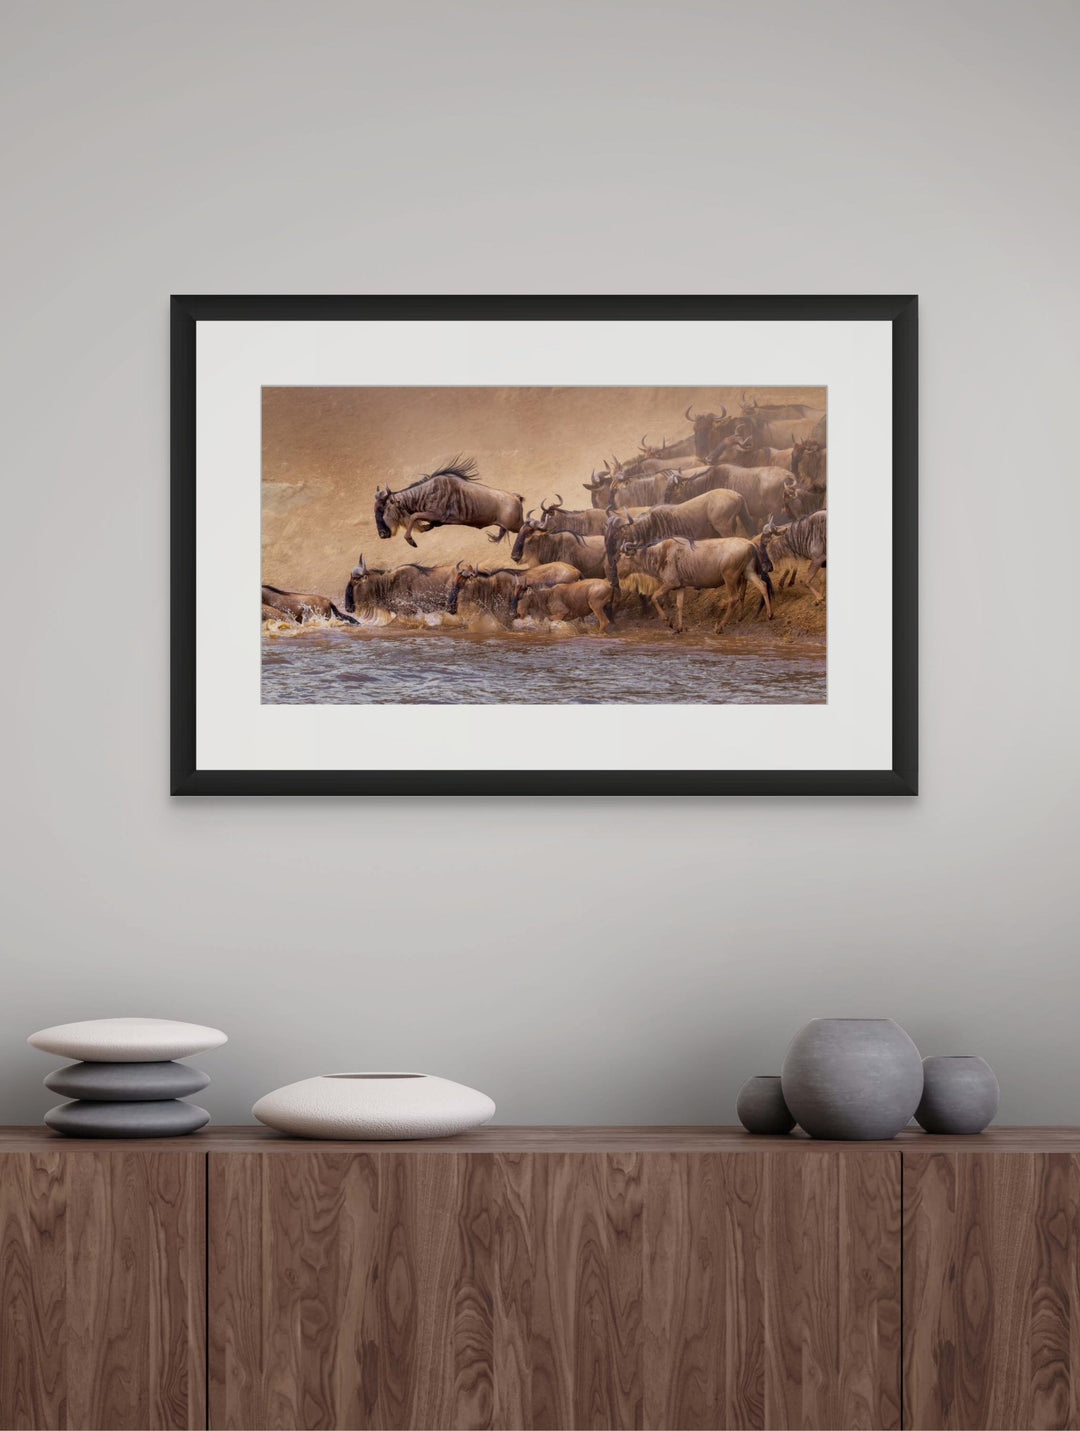 Fine art framed photograph: In the Serengeti's wildebeest migration, the Mara River crossing captivates. A lone wildebeest airborne, embodying the wild pulse of nature's symphony in this extraordinary spectacle. By Thomas Nicholson